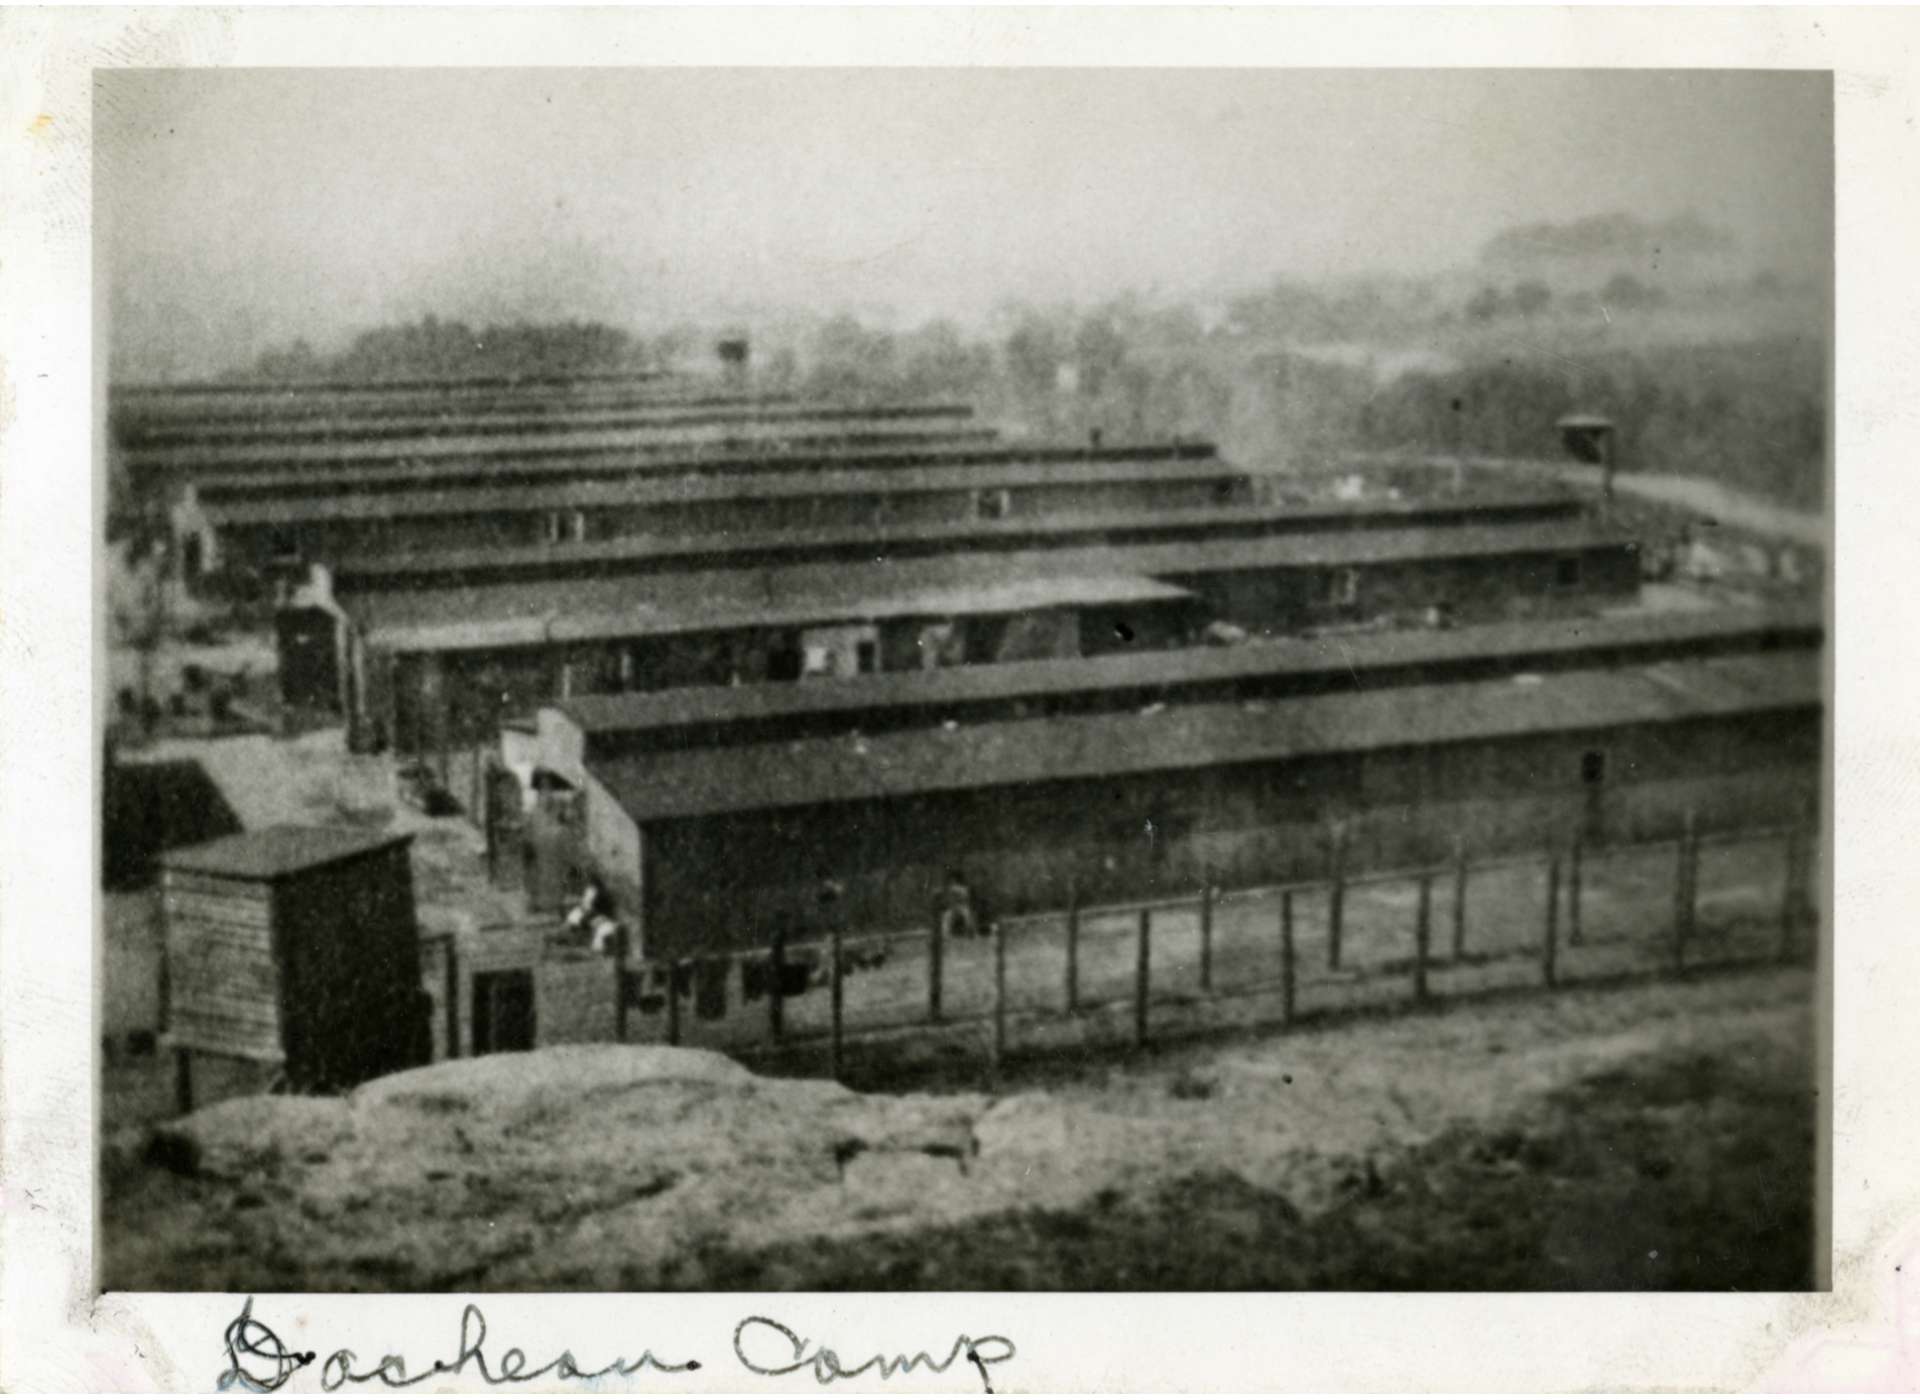 Barracks of the concentration camp at Dachau, 1945. Gift of Vincent Yannetti, from the Collection of The National WWII Museum, 2008.321.230.